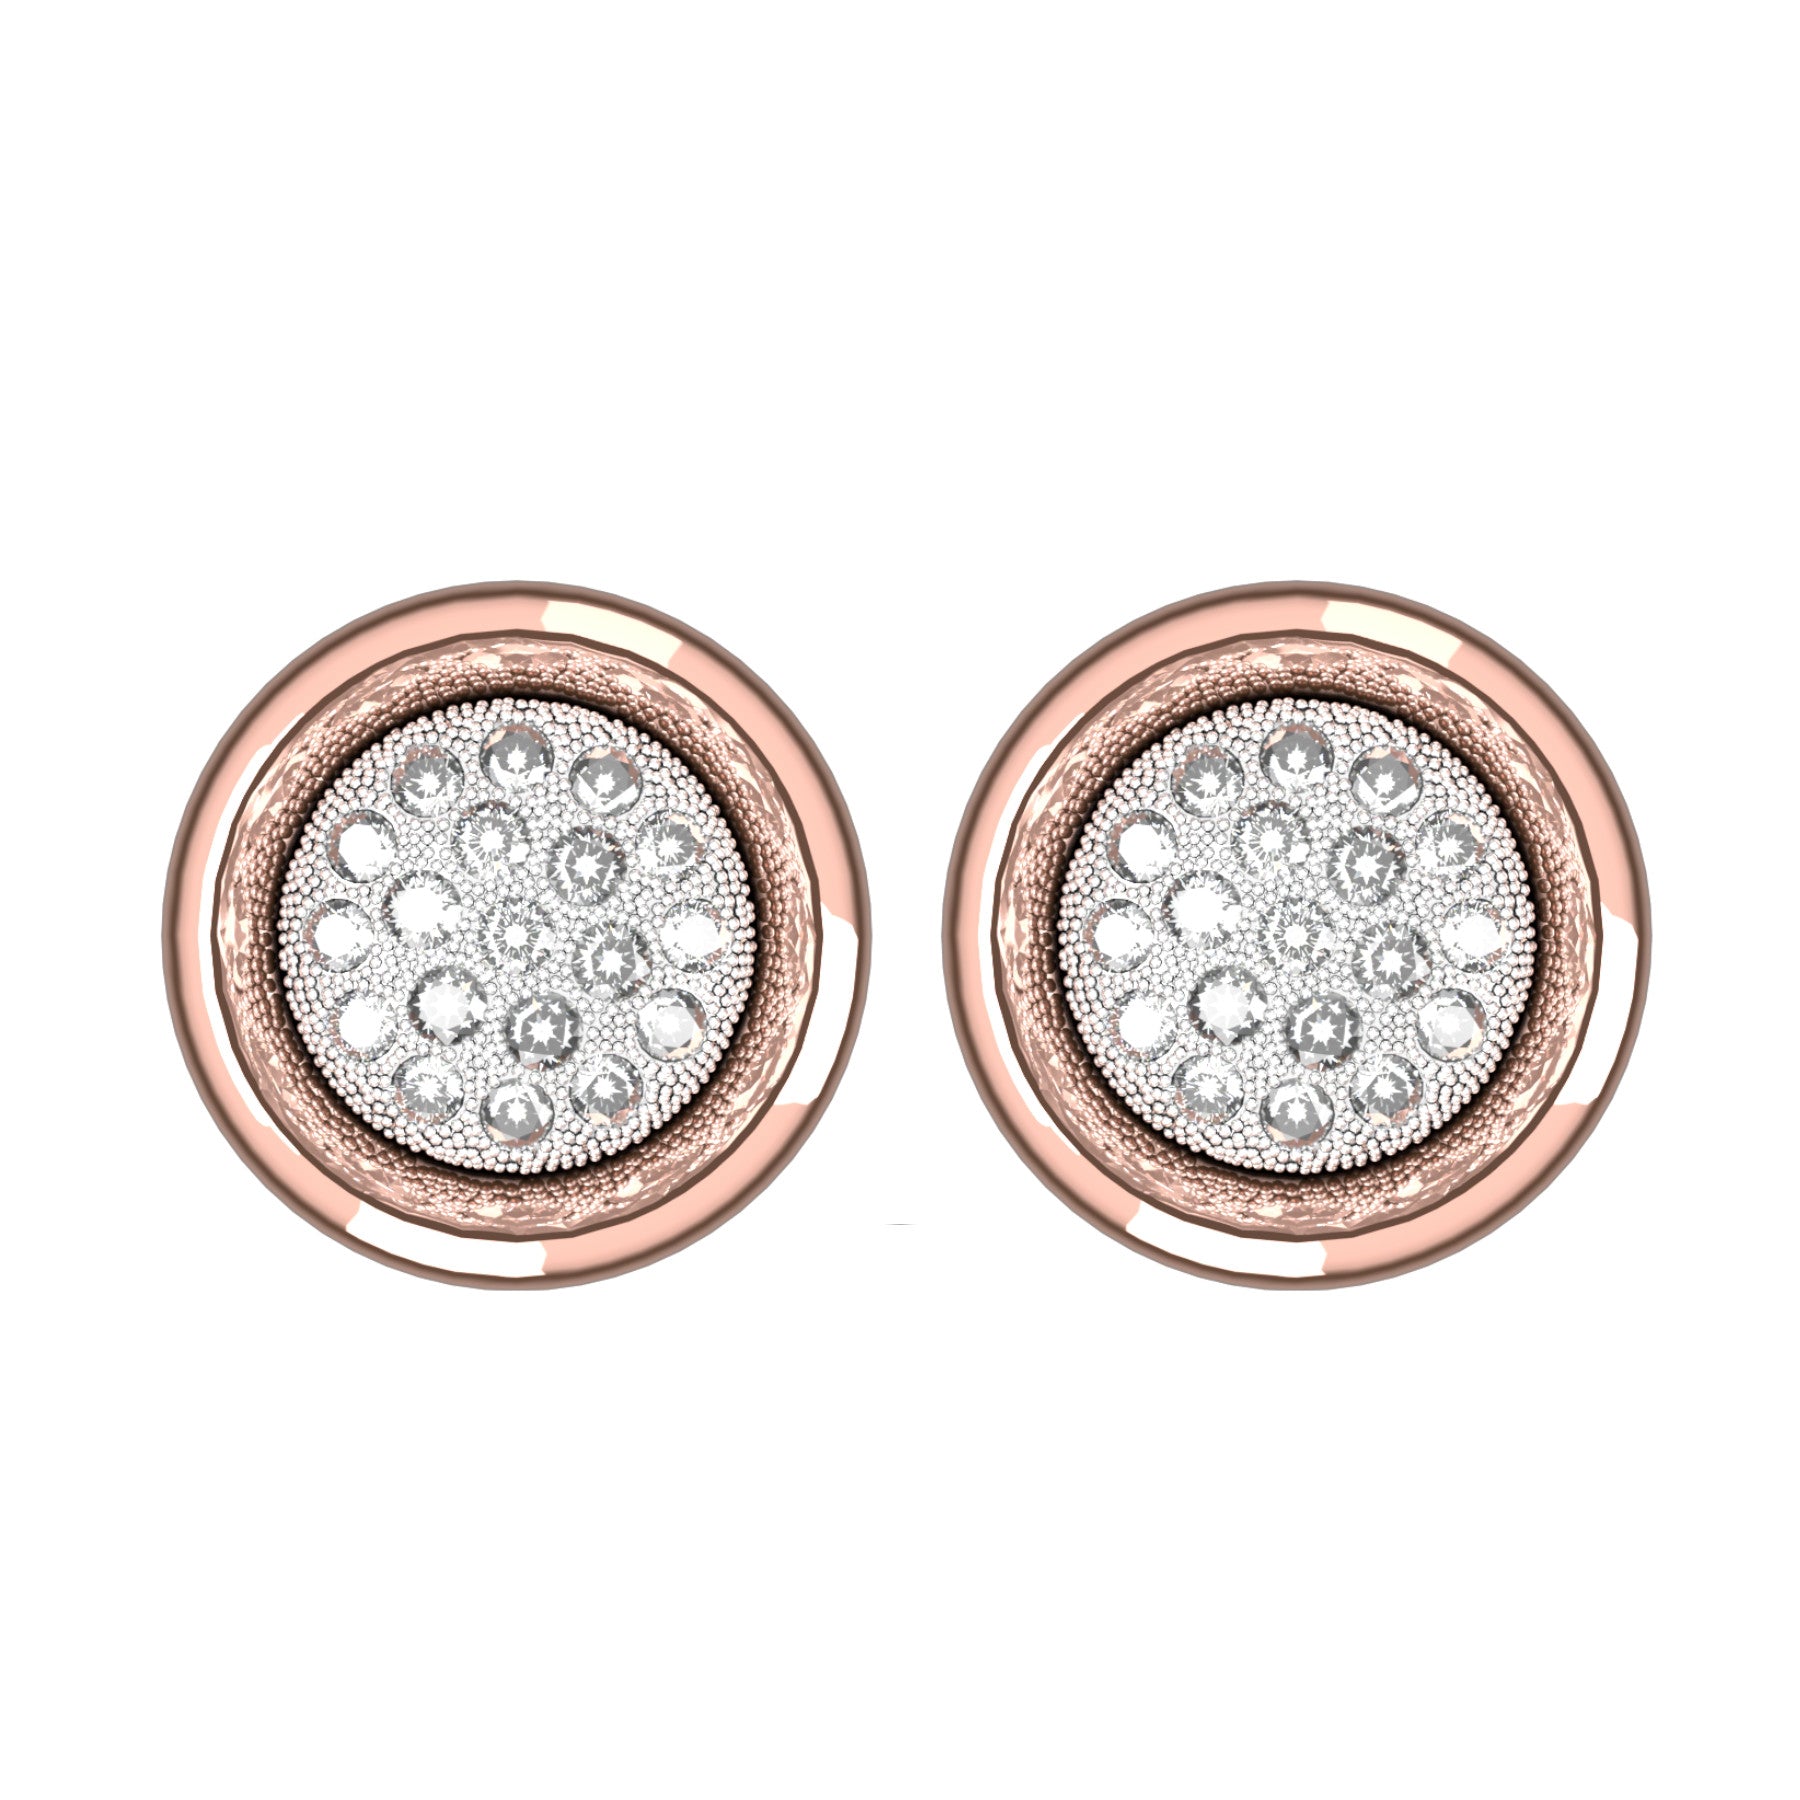 round earrings, round natural diamonds, 18 K pink and white gold, weight about 10,6 g. (0.38 oz) diameter 15 mm